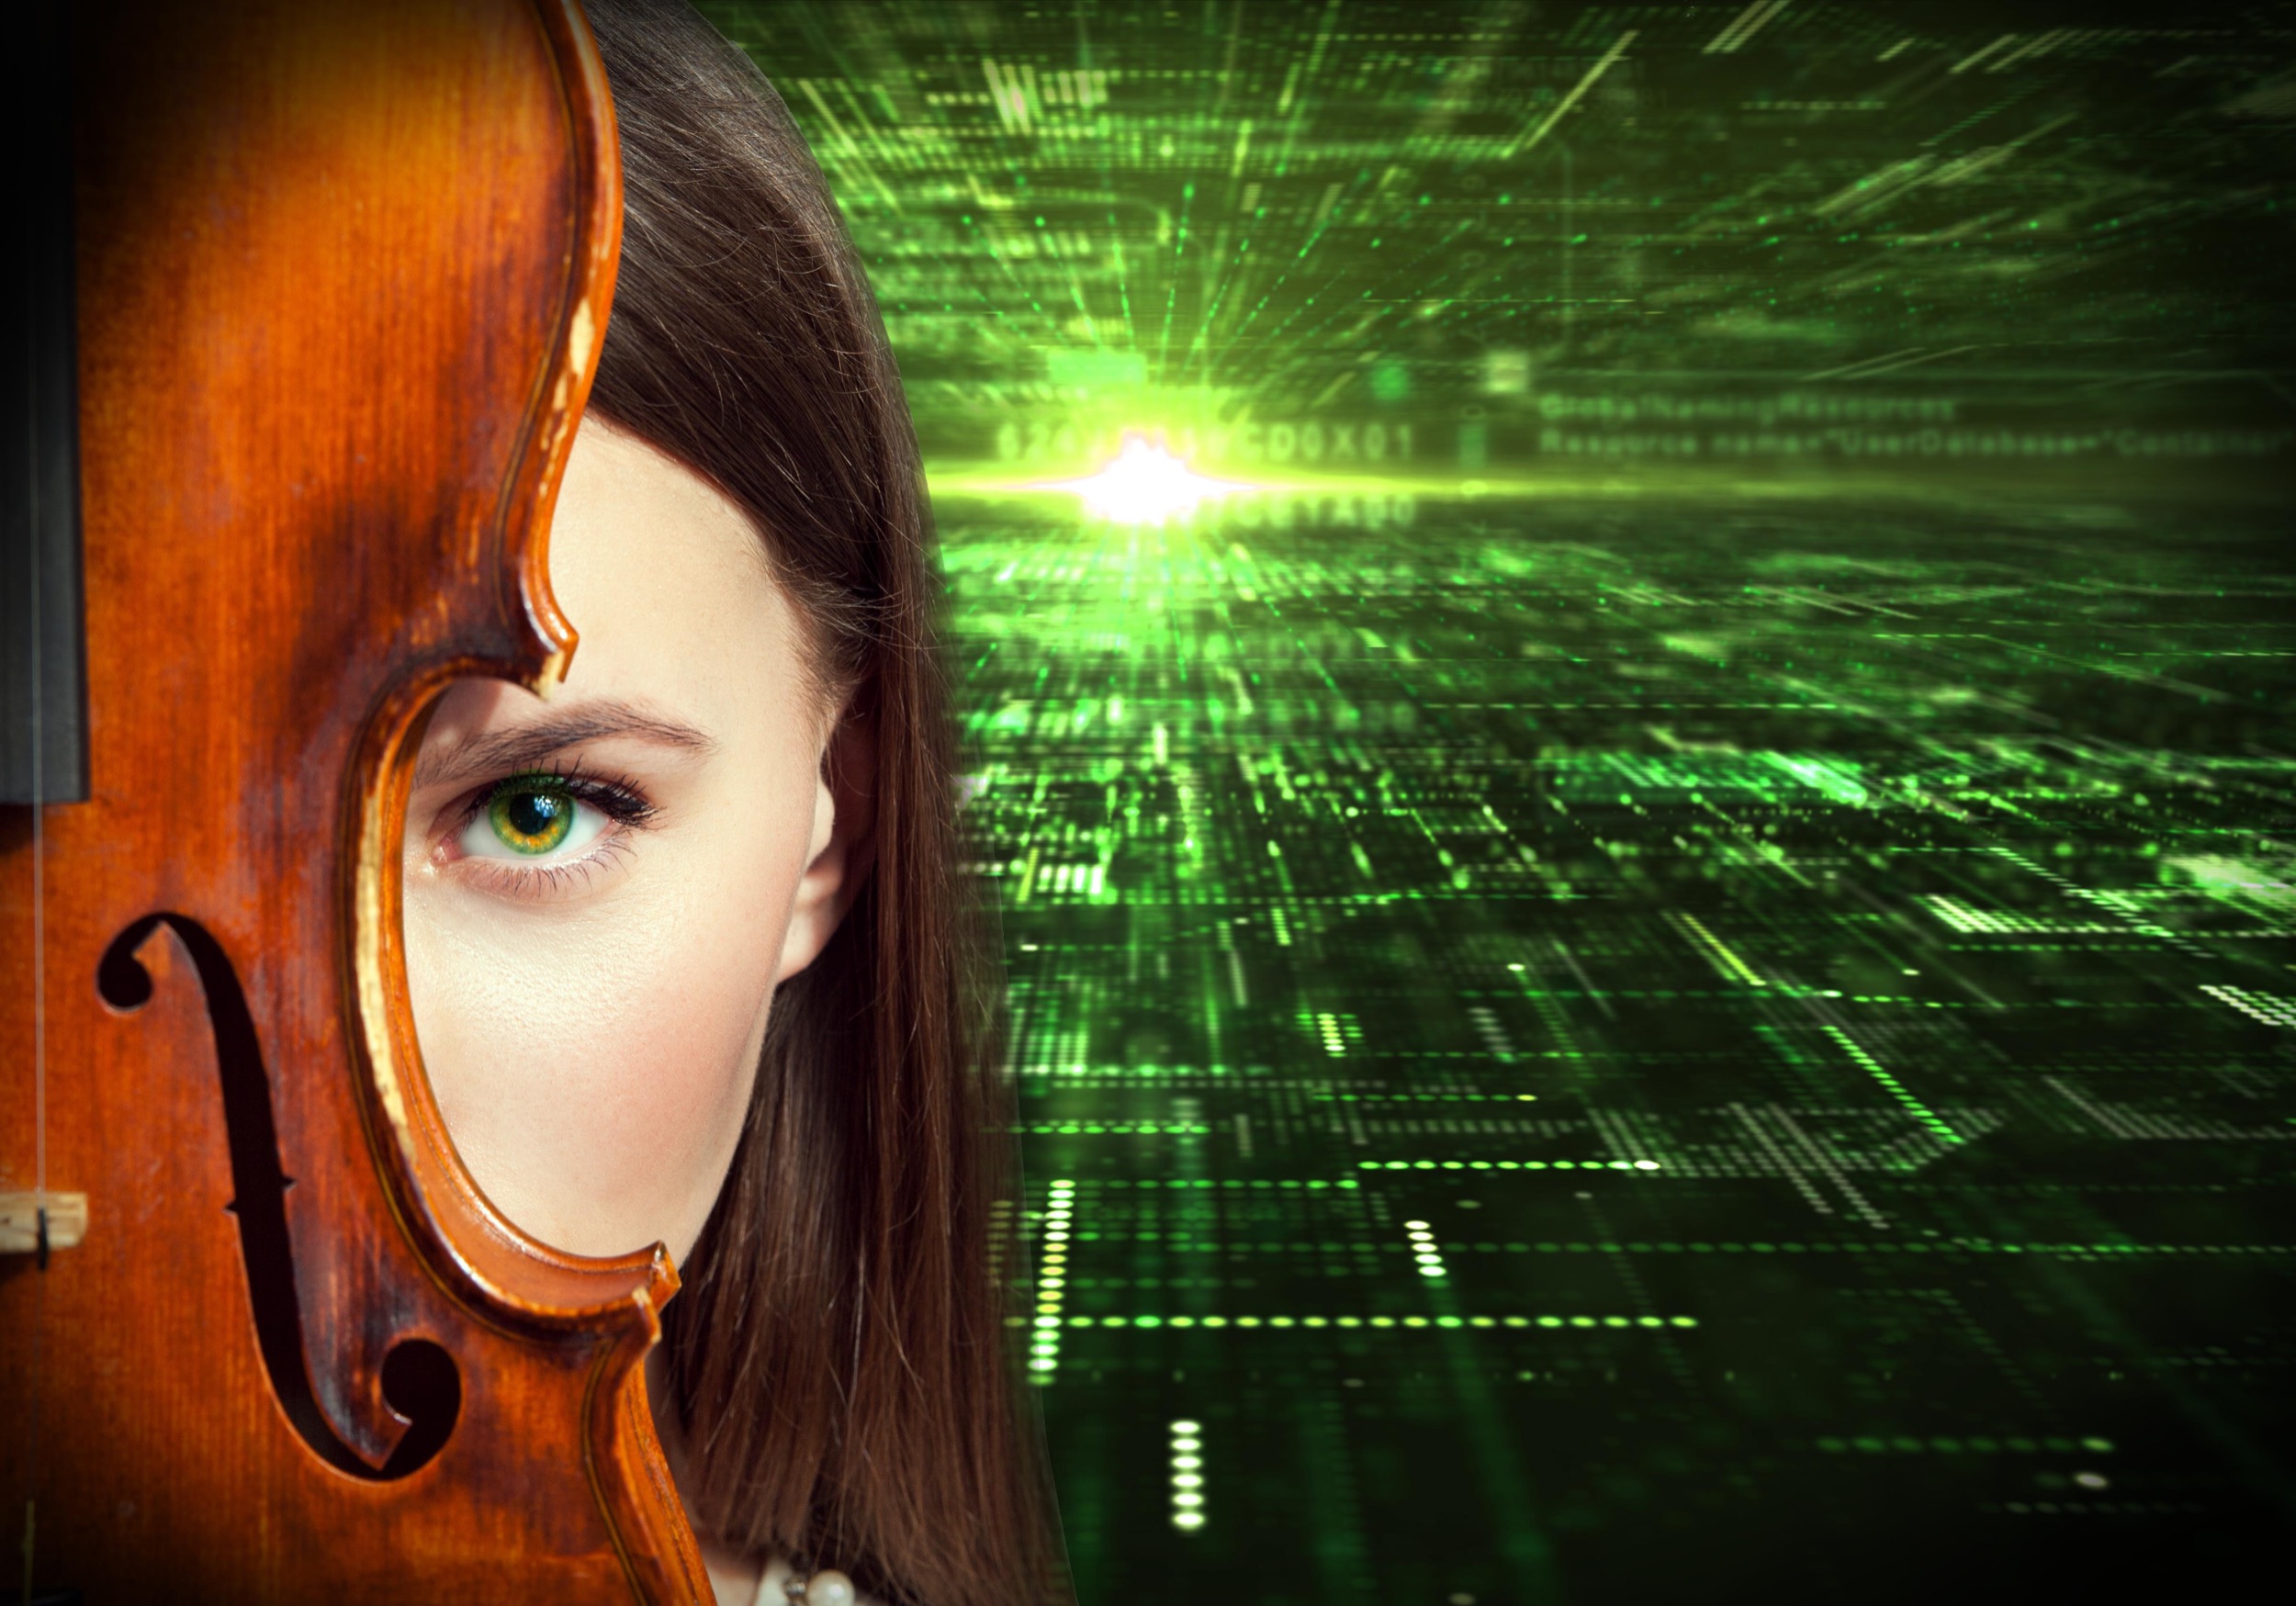 Young woman obsuring half of her face with a violin with green computer components creating a horizon in the background